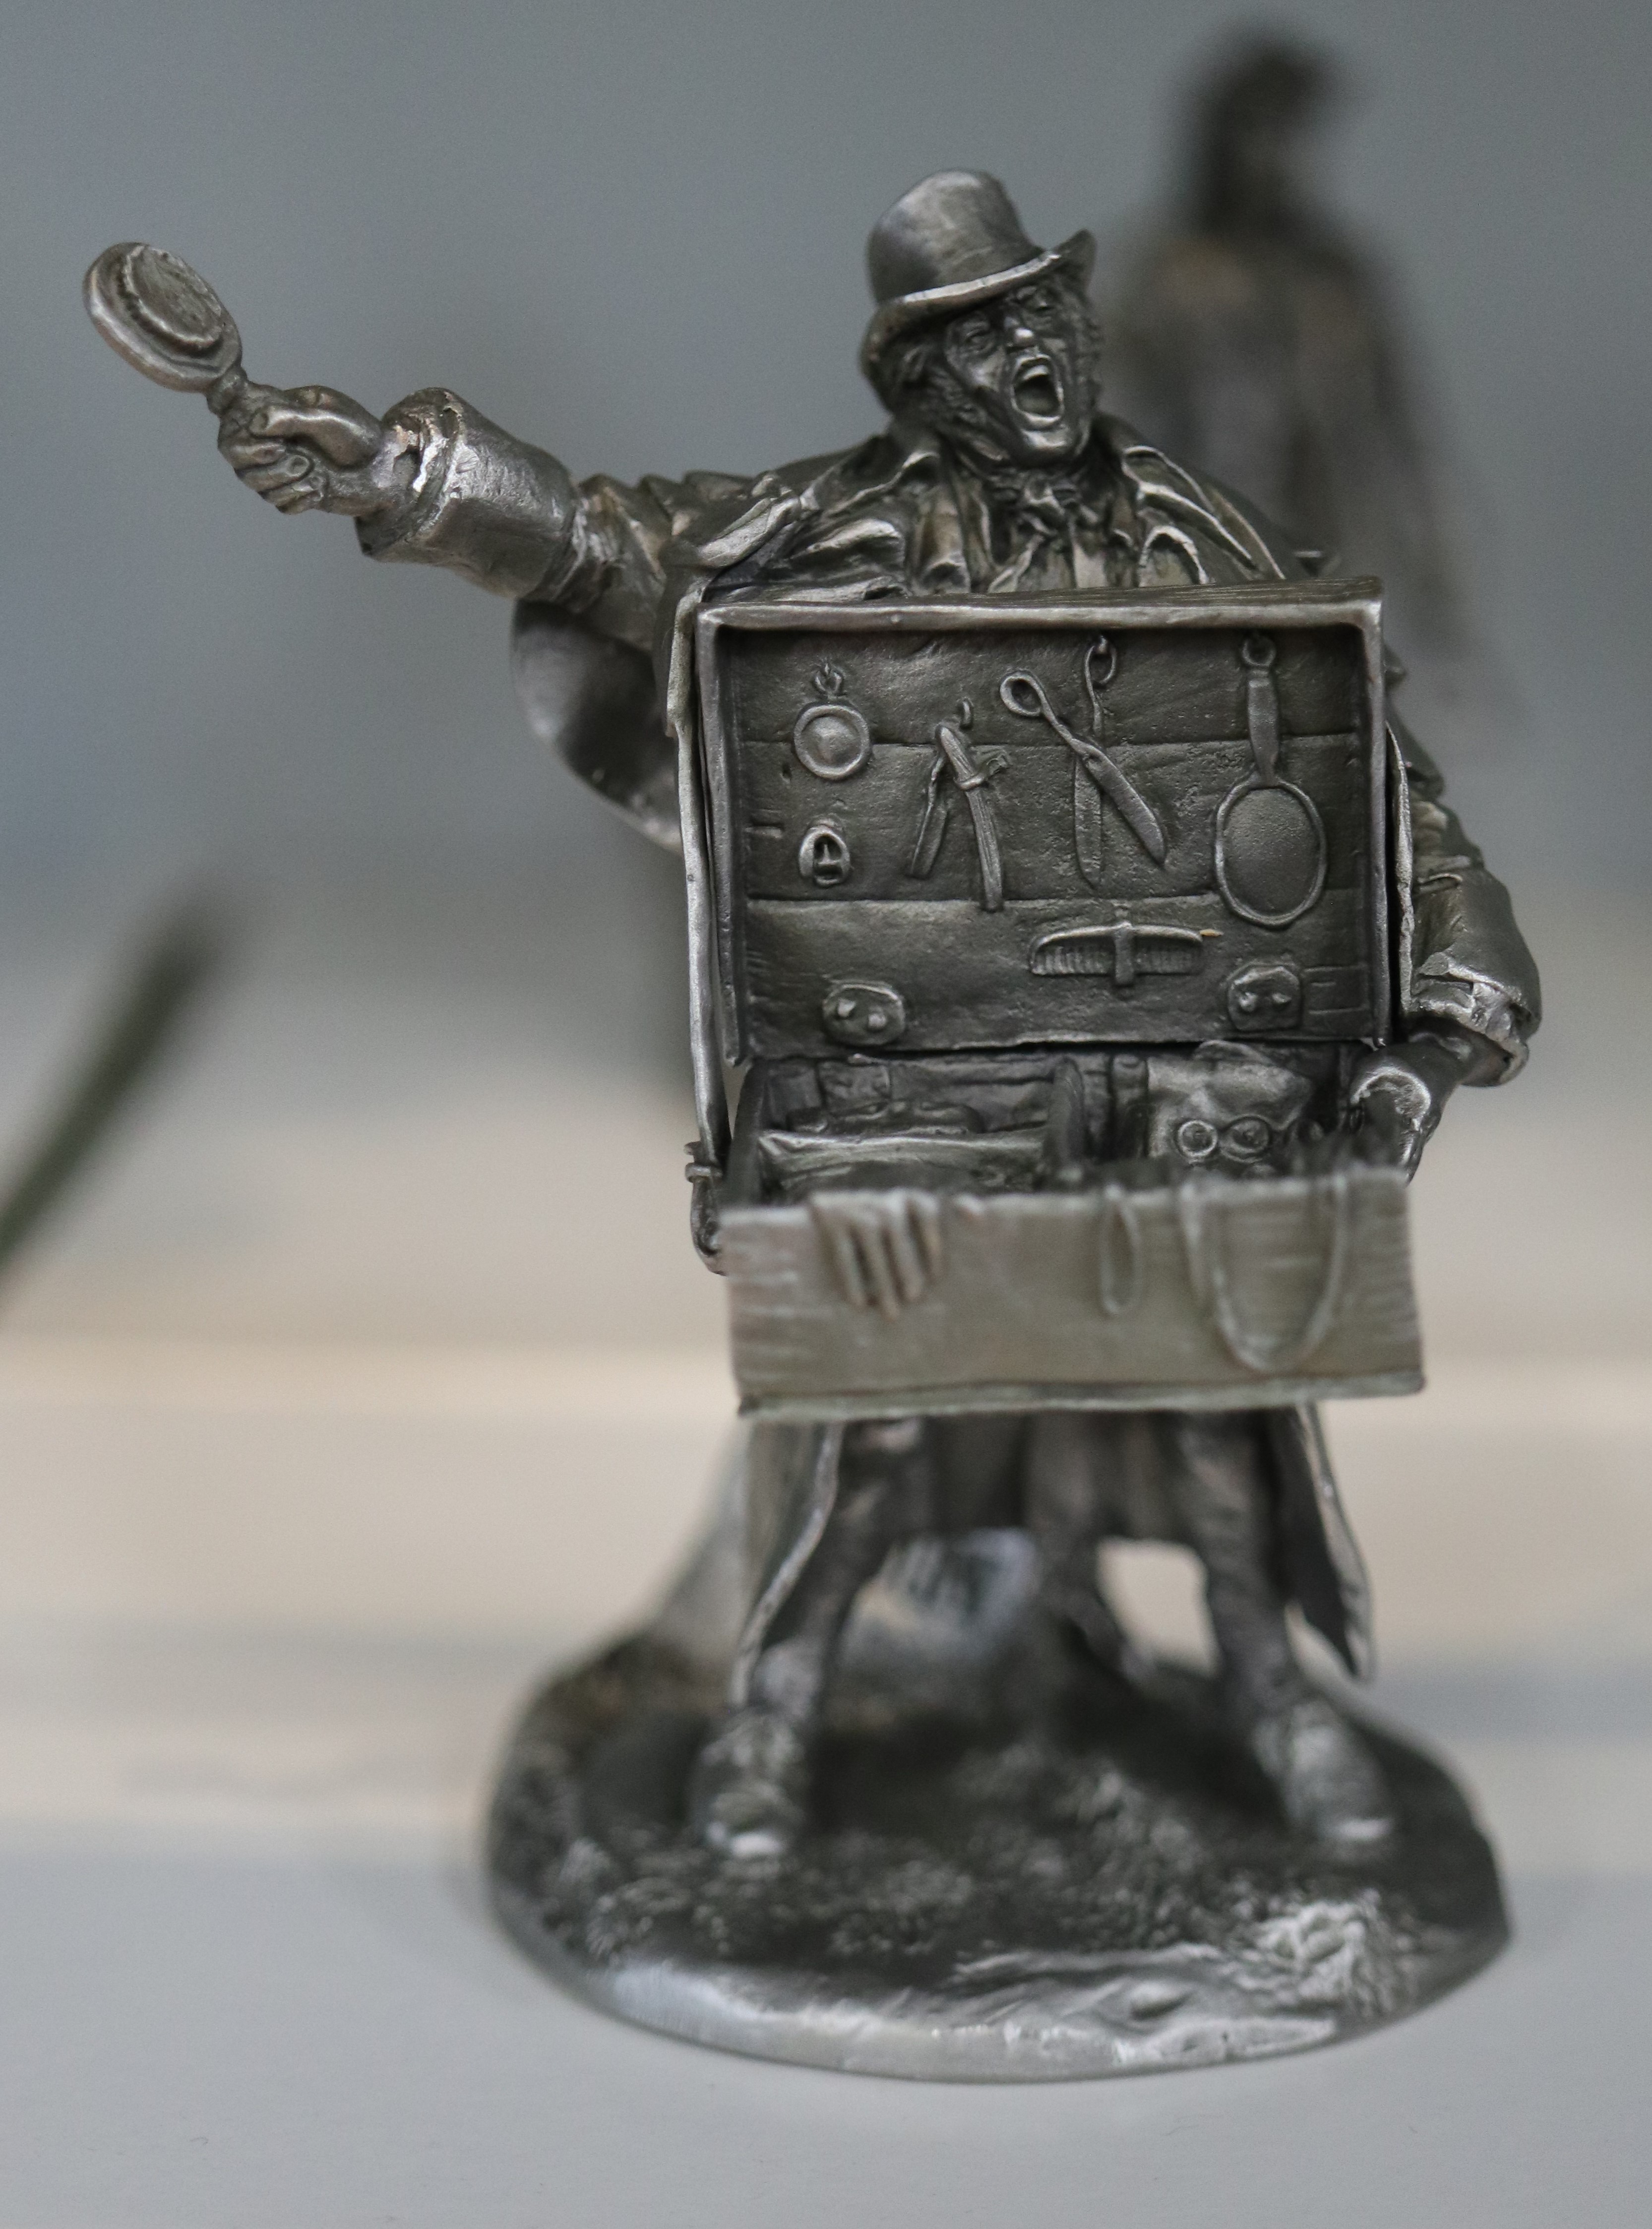 Complete collection of pewter figurines the Cries of London in original boxes - Image 9 of 13